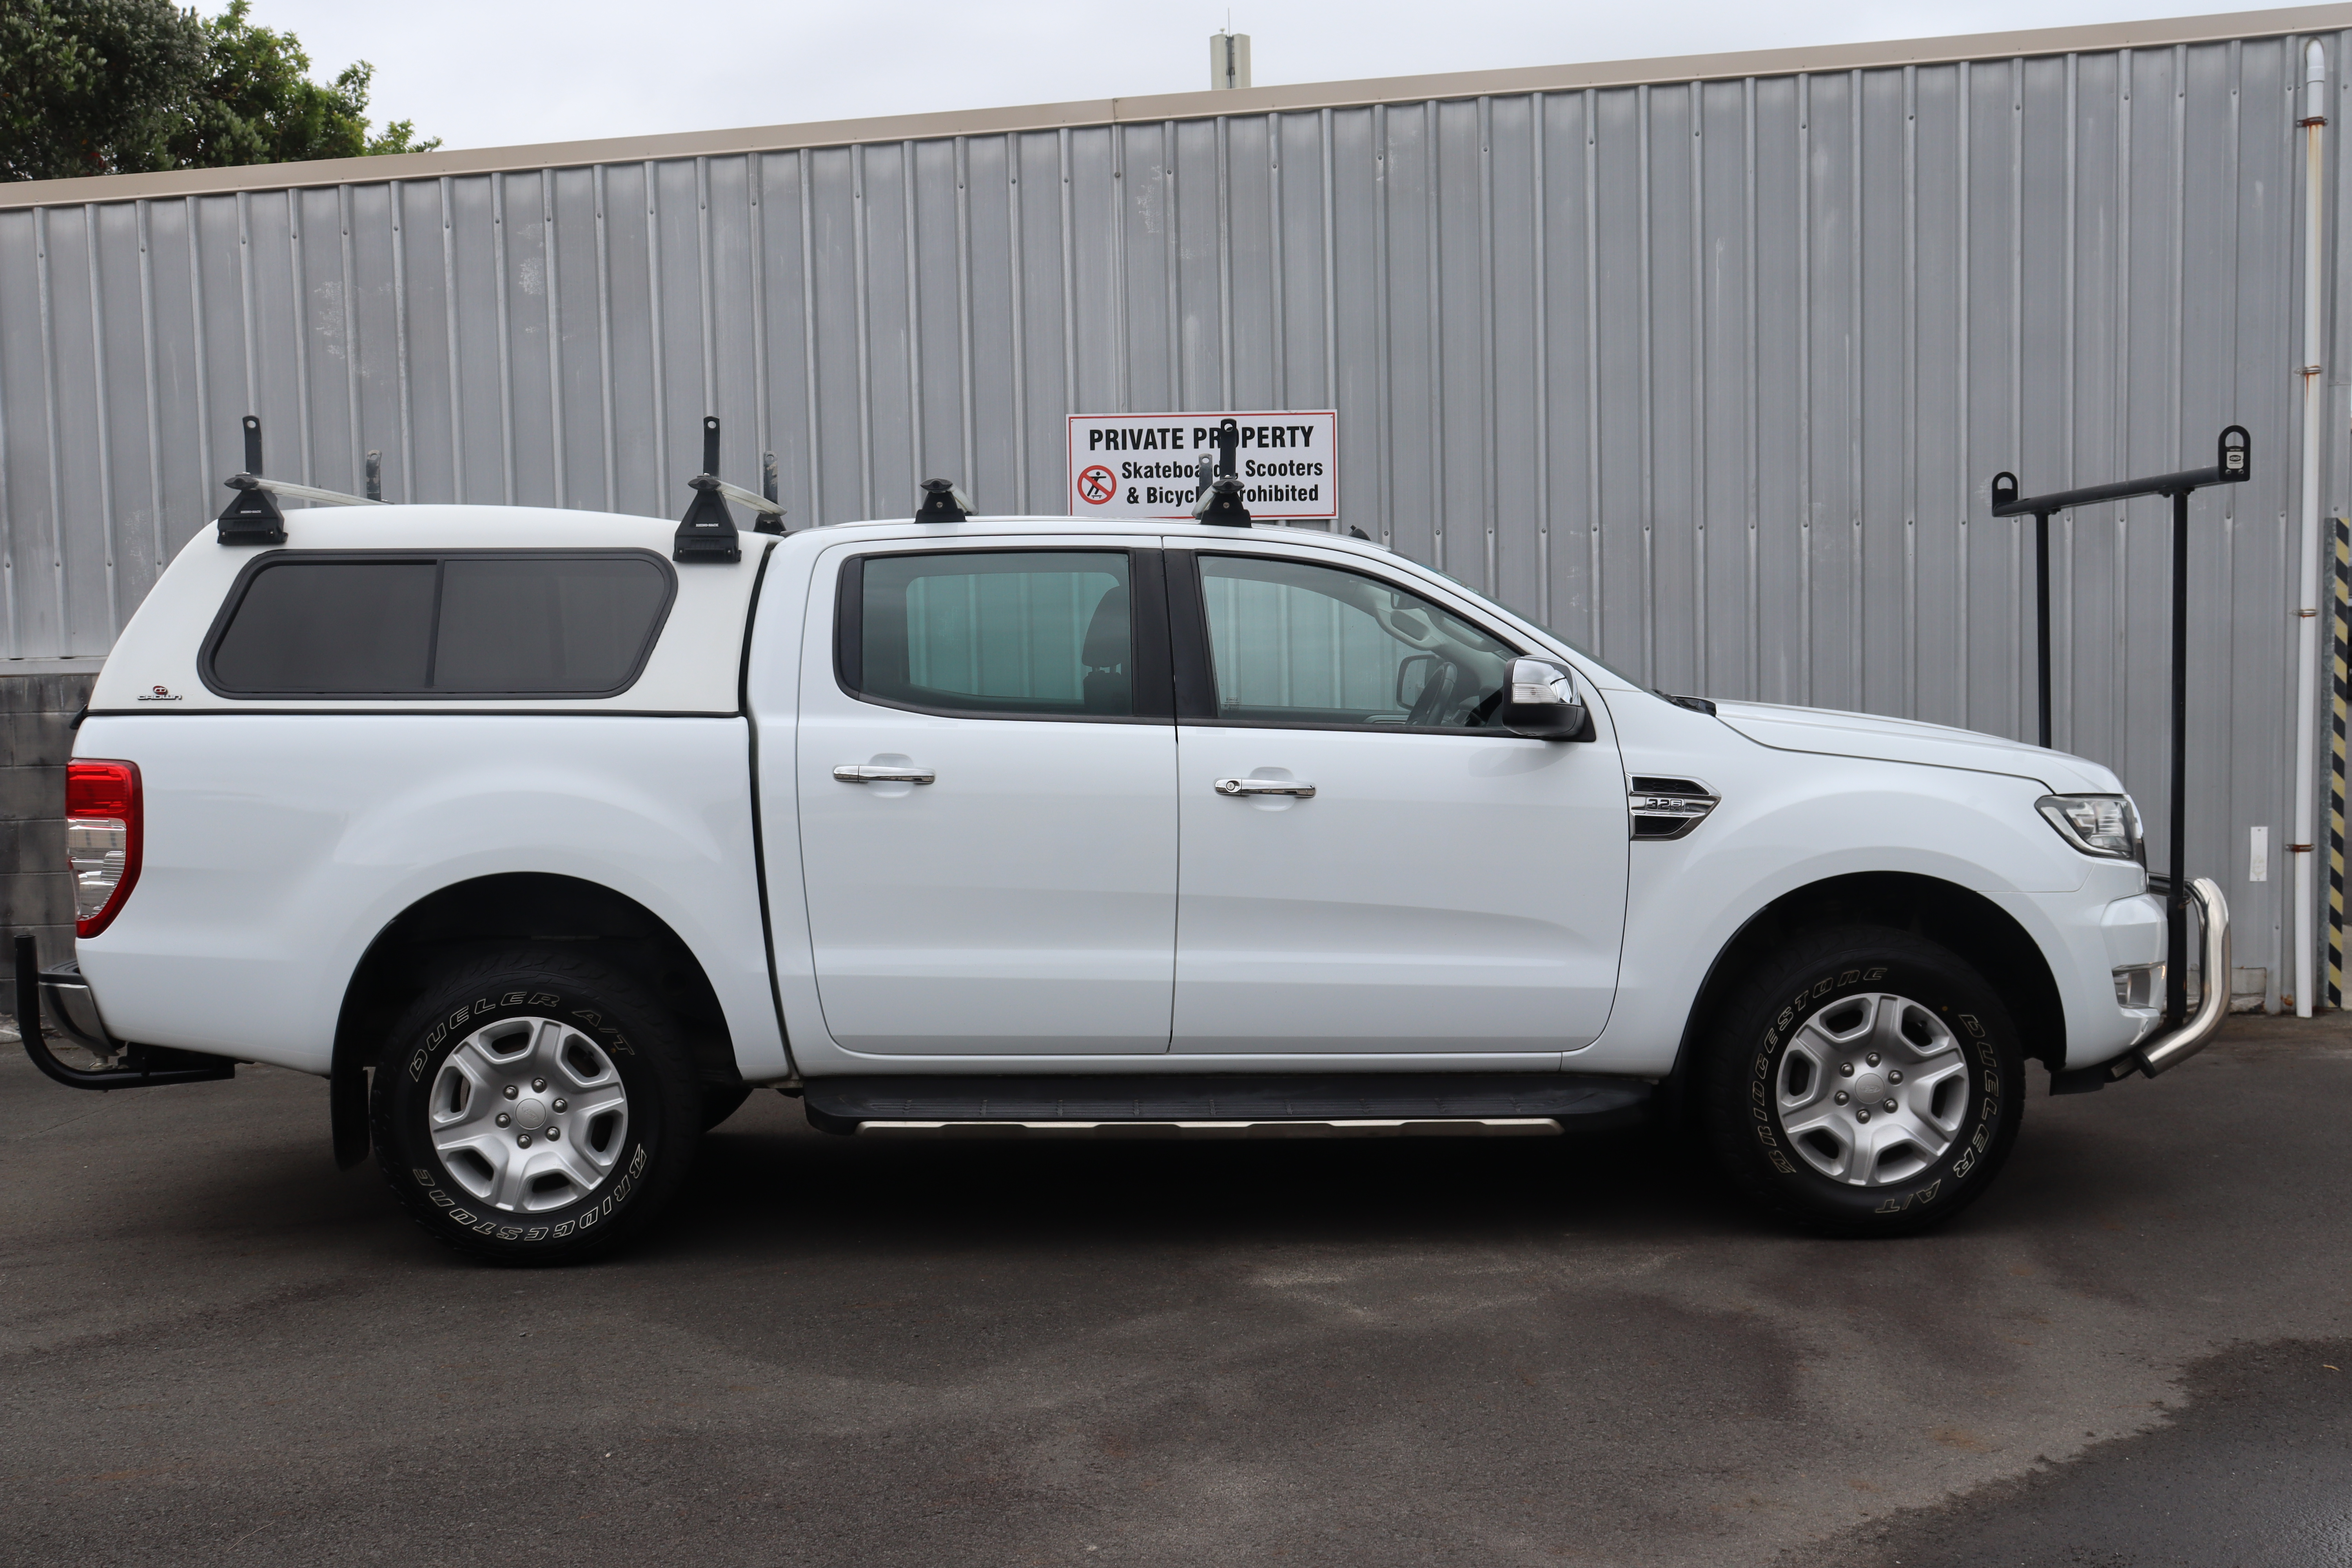 Ford Ranger 2017 for sale in Auckland